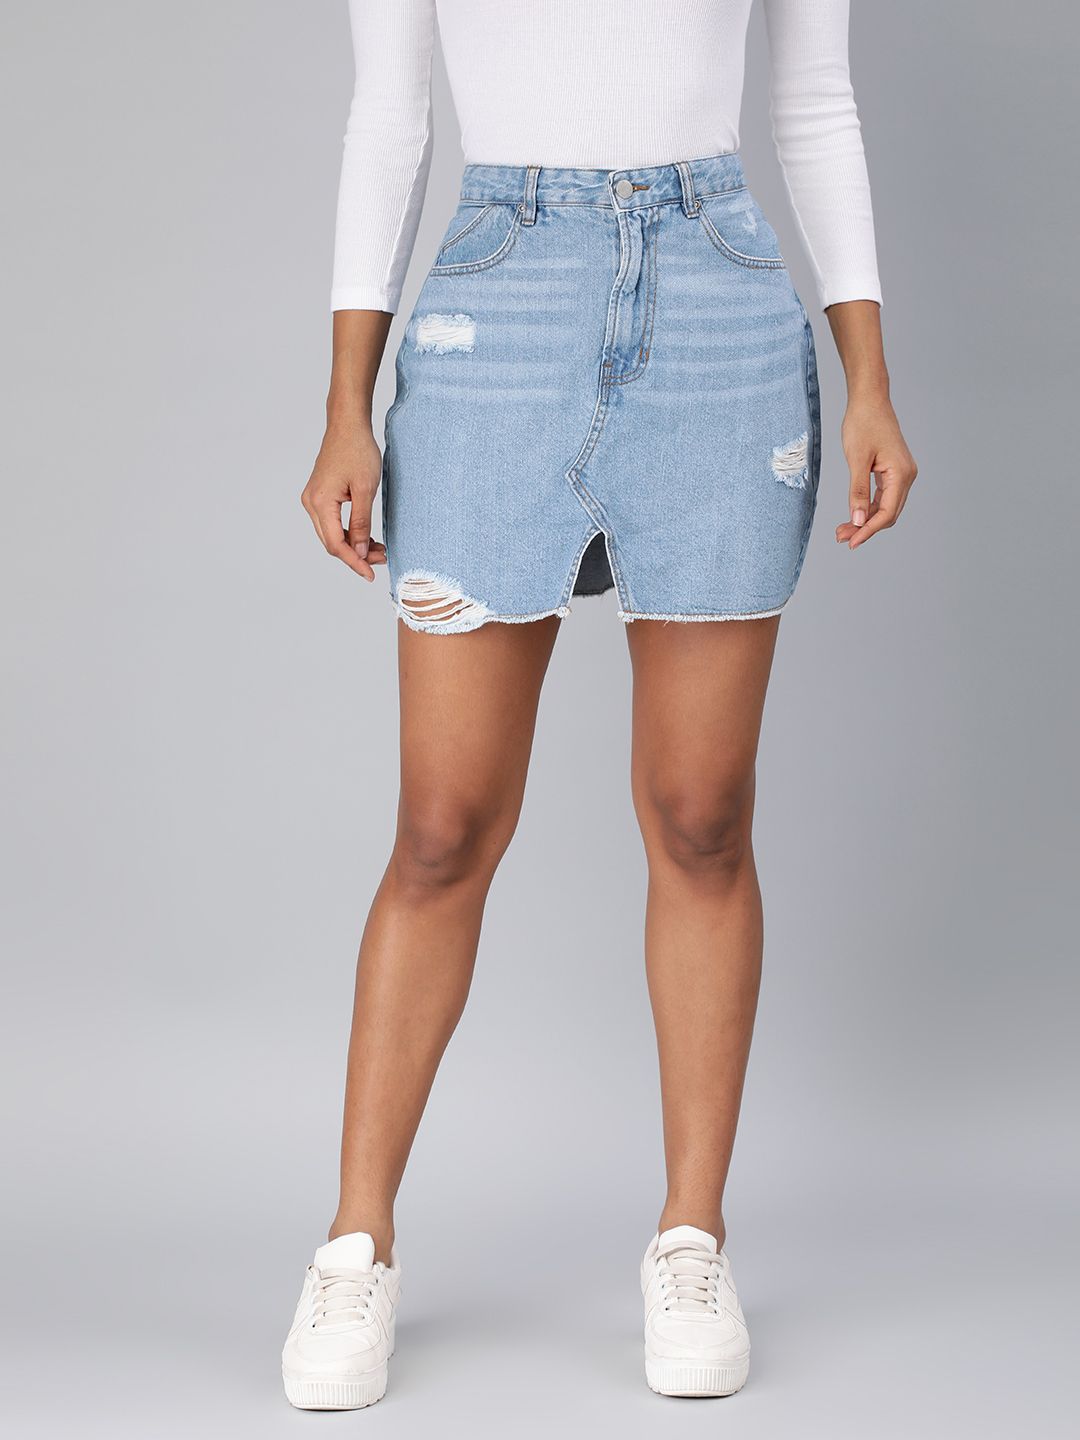 London Rag Washed Pure Cotton Distressed Straight Denim Mini Skirt Price in India